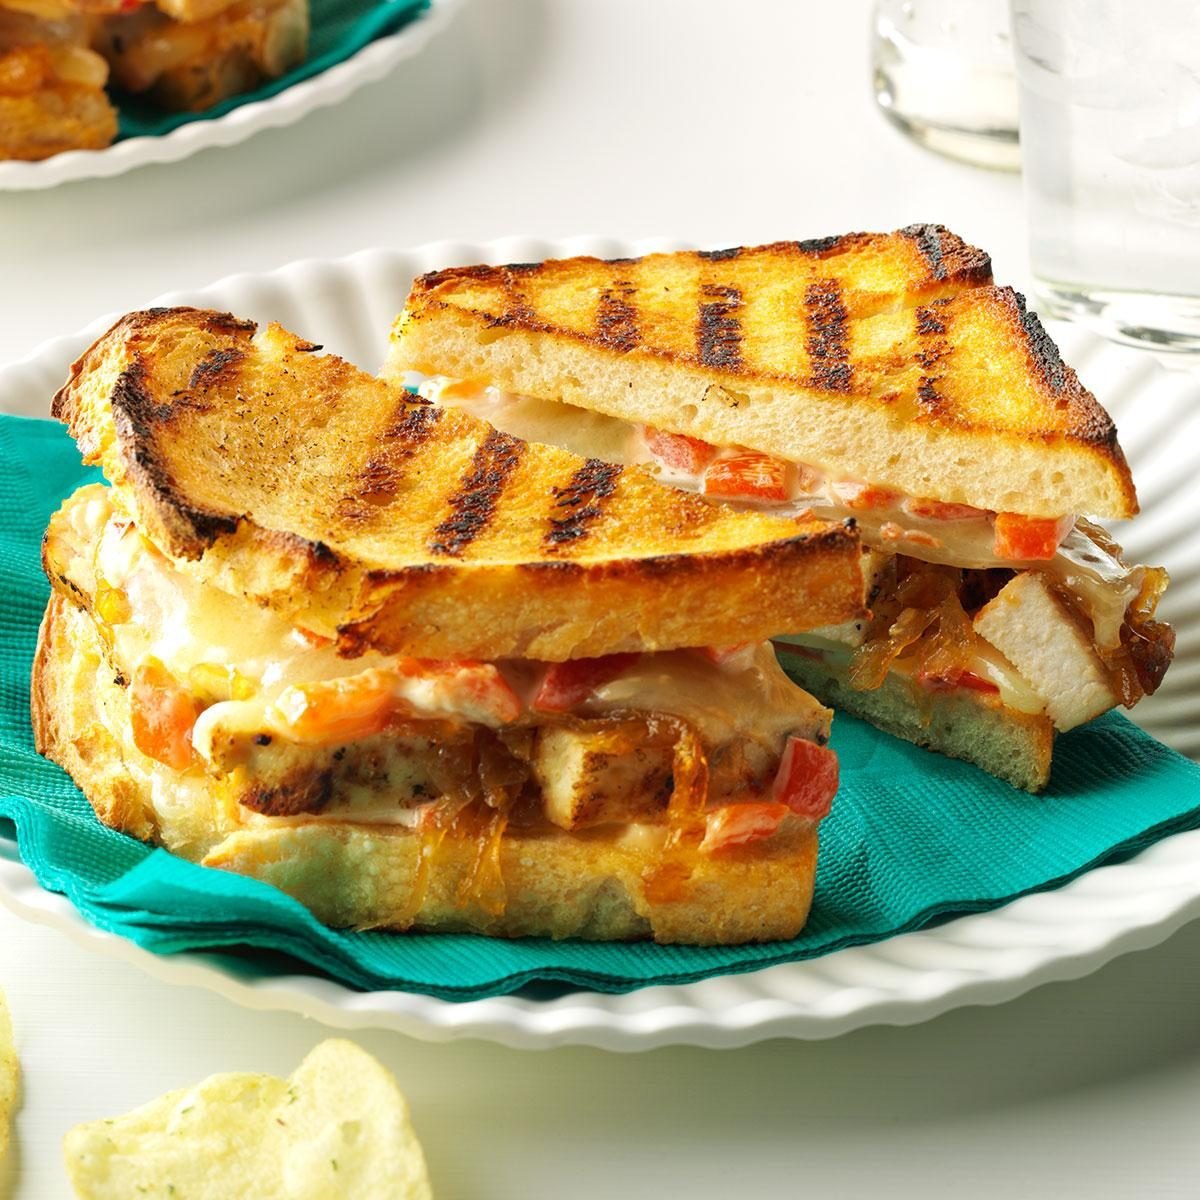 Chicken & Caramelized Onion Grilled Cheese